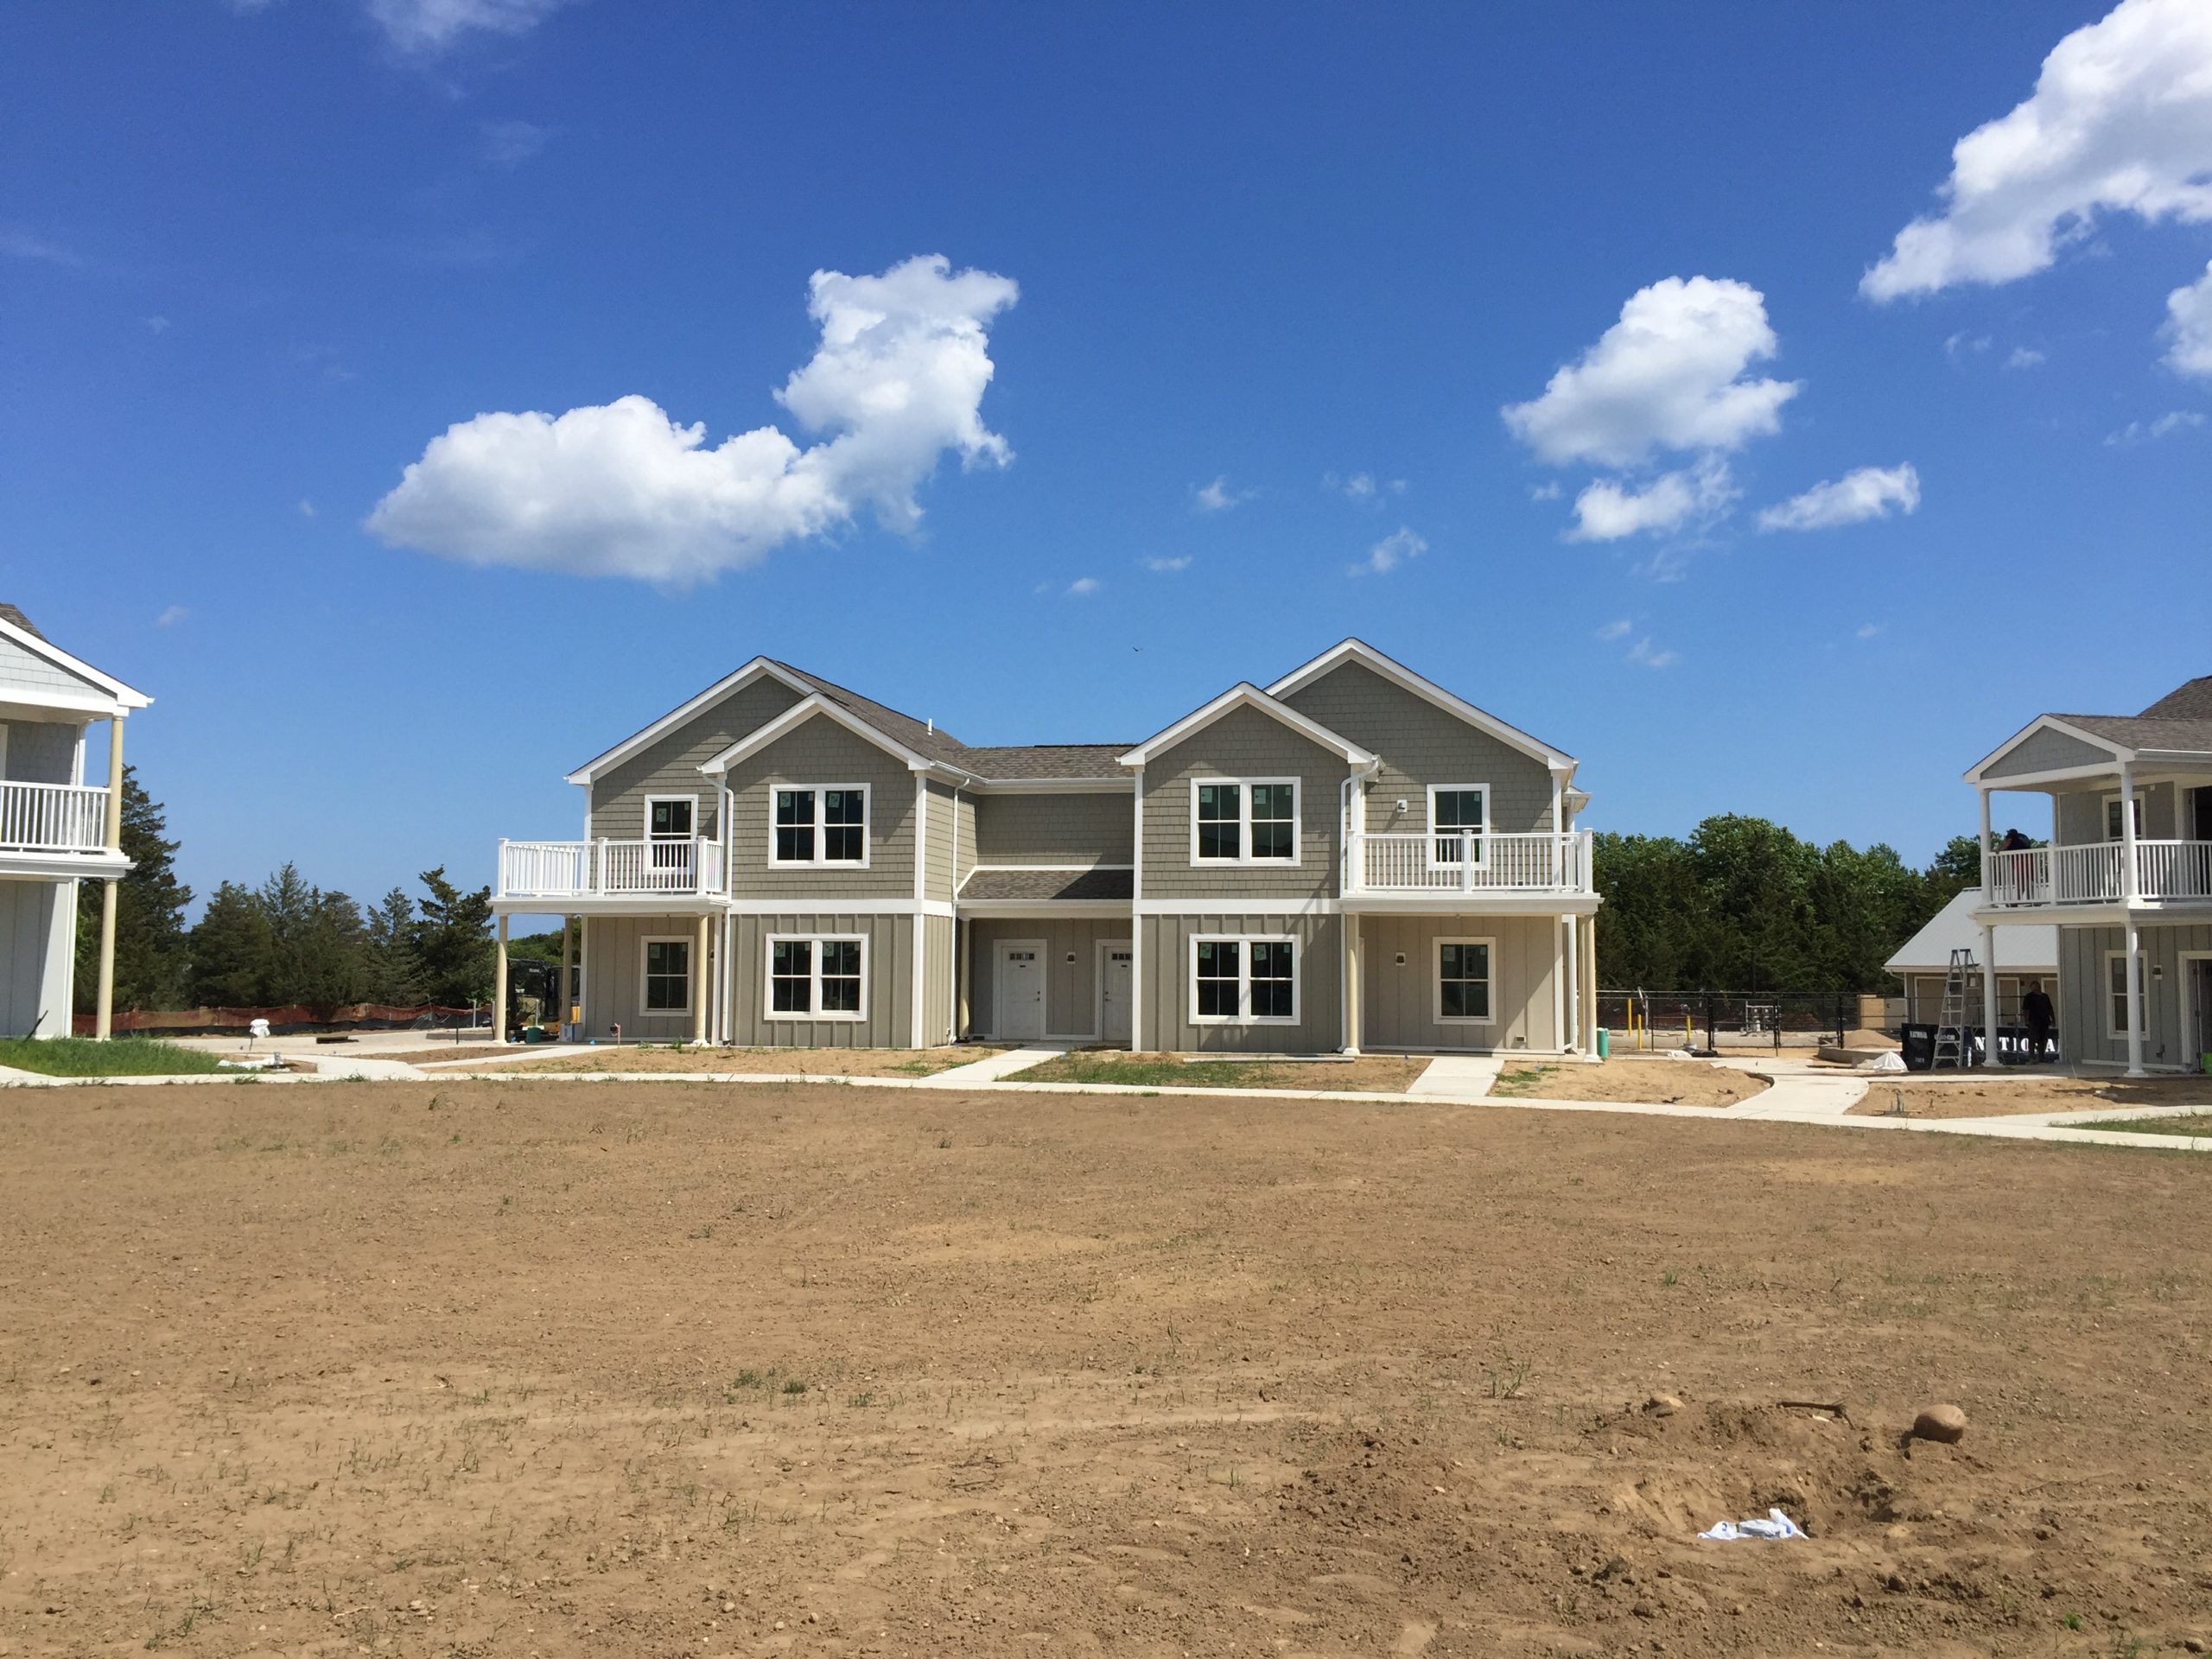 The East Hampton Housing Authority has extended the deadline to apply for the lottery at the Gansett Meadows apartment complex in Amagansett, which is nearing completion. 